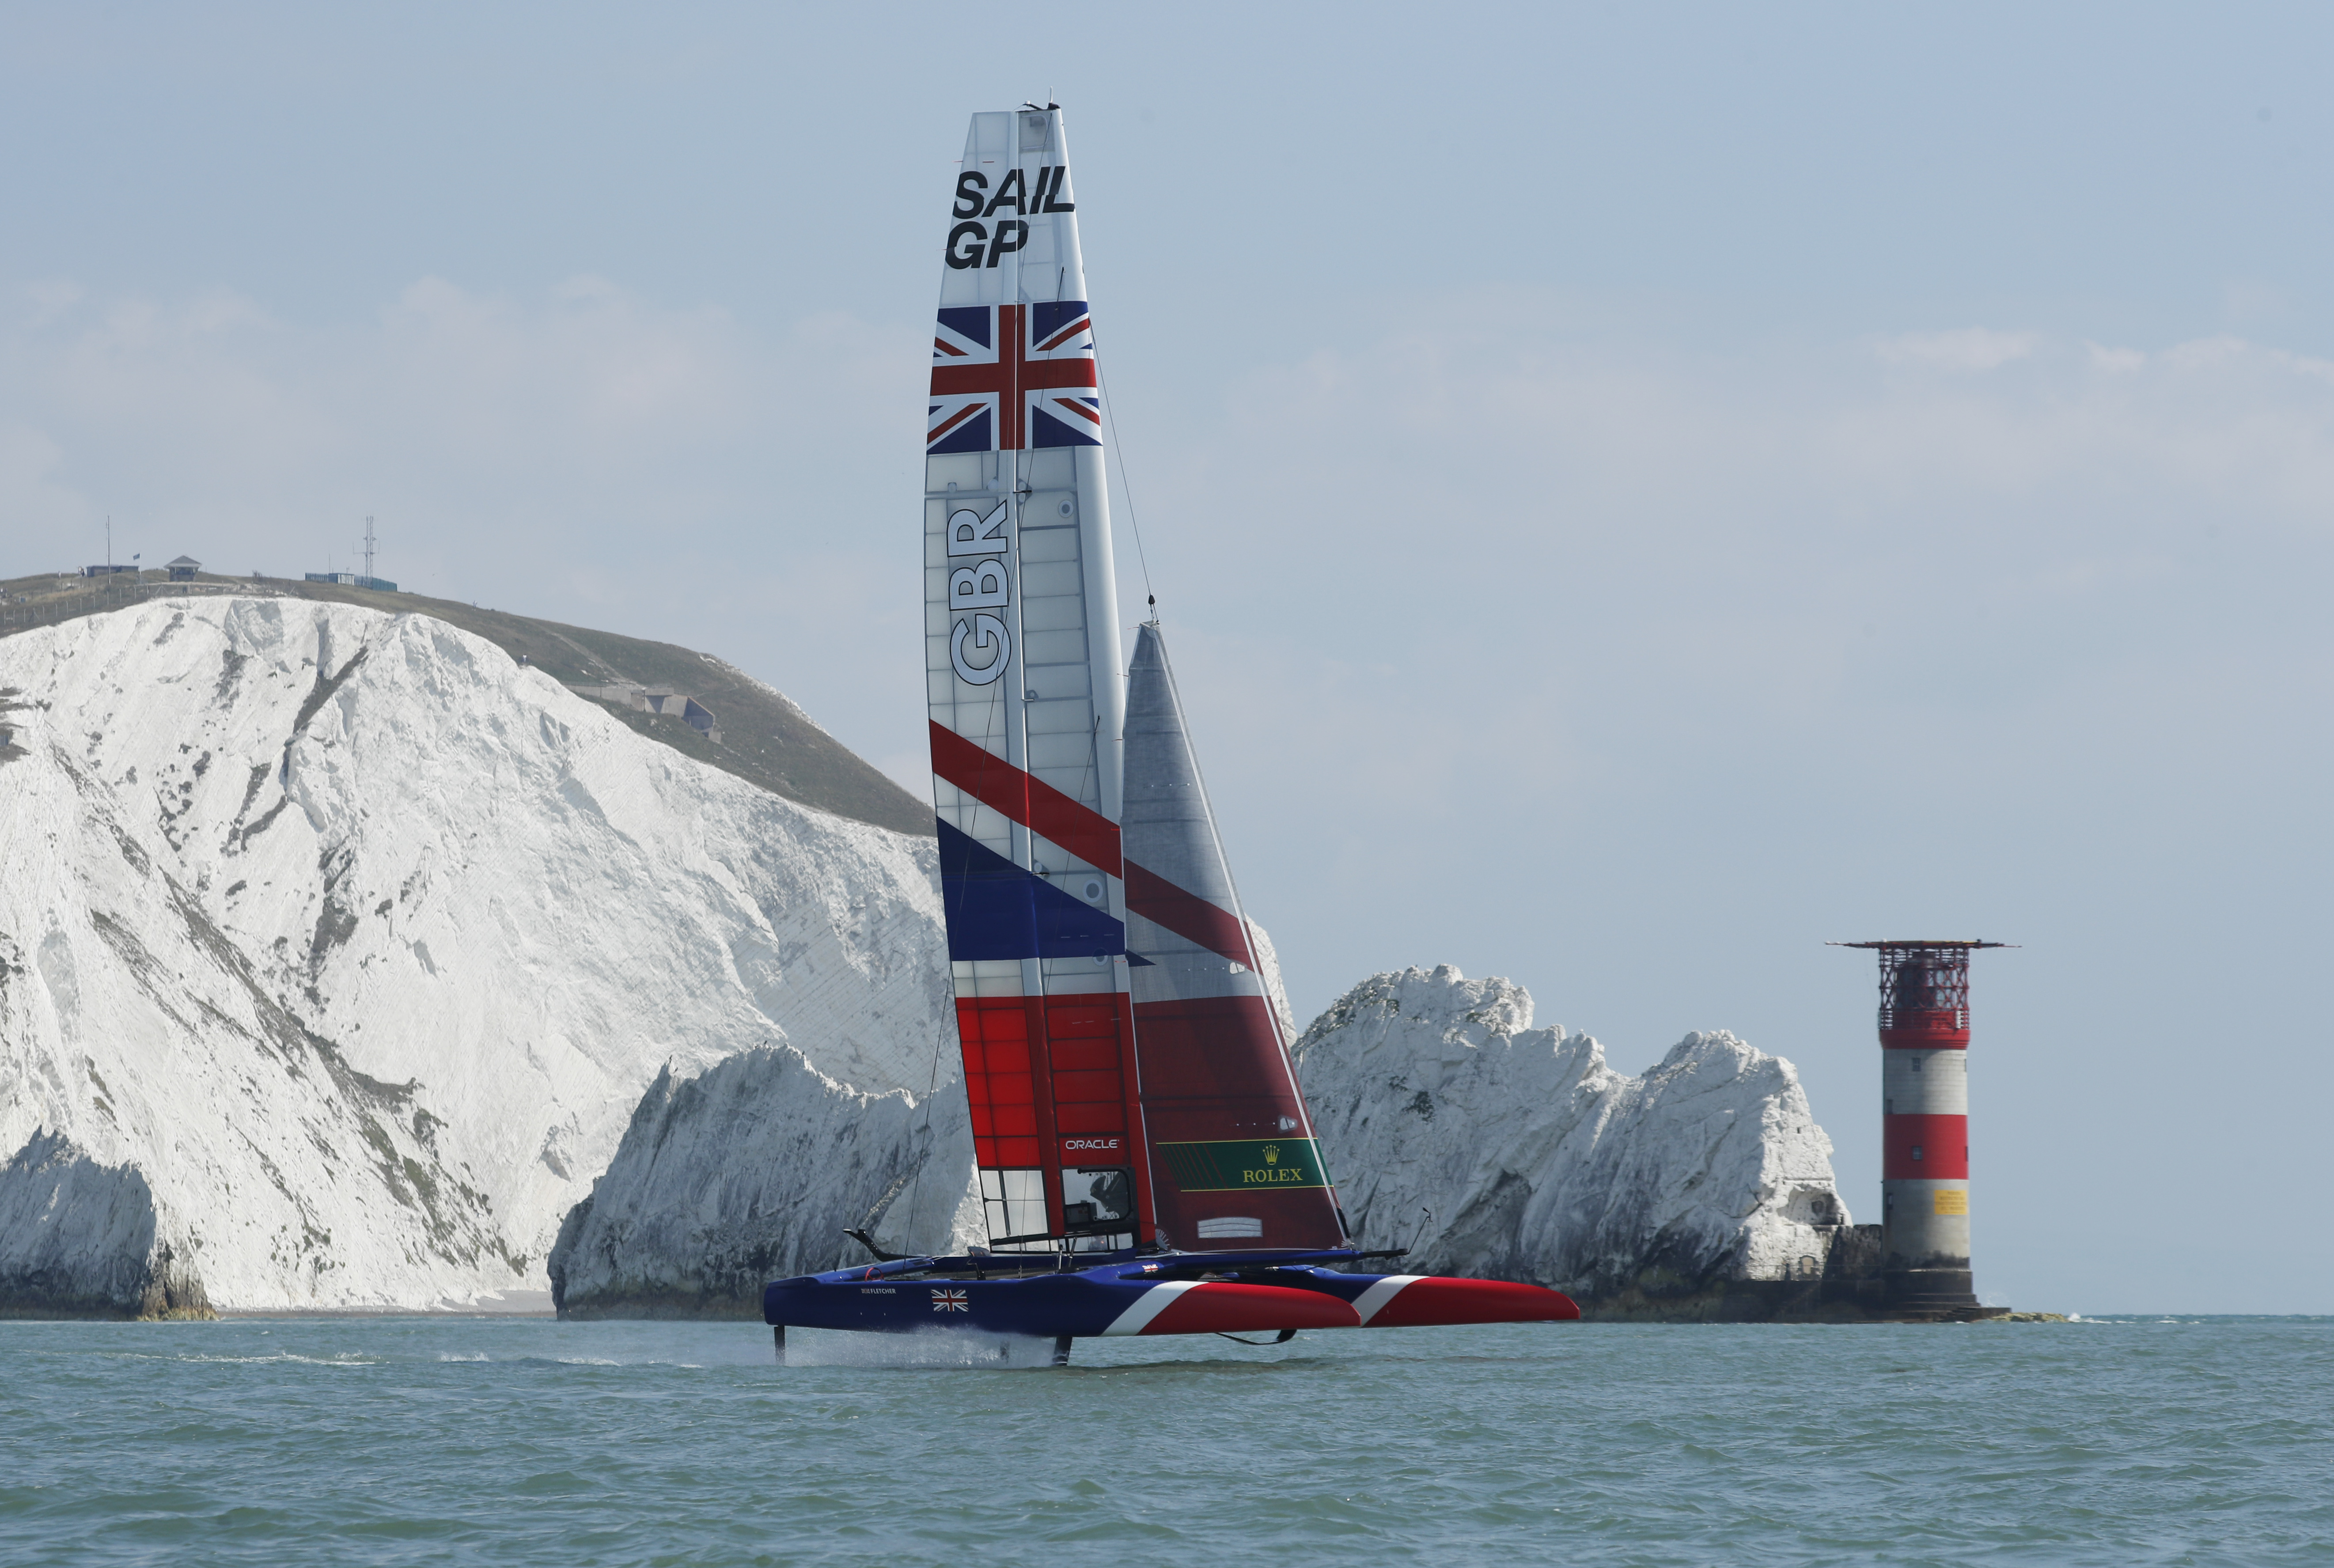 Great Britain SailGP Team](https://sailgp.com/teams/great-britain/) was the first of the six national teams to take to the water. Sailing down to the iconic Needles, the Isle of Wight’s most famous landmark off the western point of the island, the team gave a glimpse of the speed and excitement expected when the fastest sail racing boats in the world go head to head at [Cowes SailGP